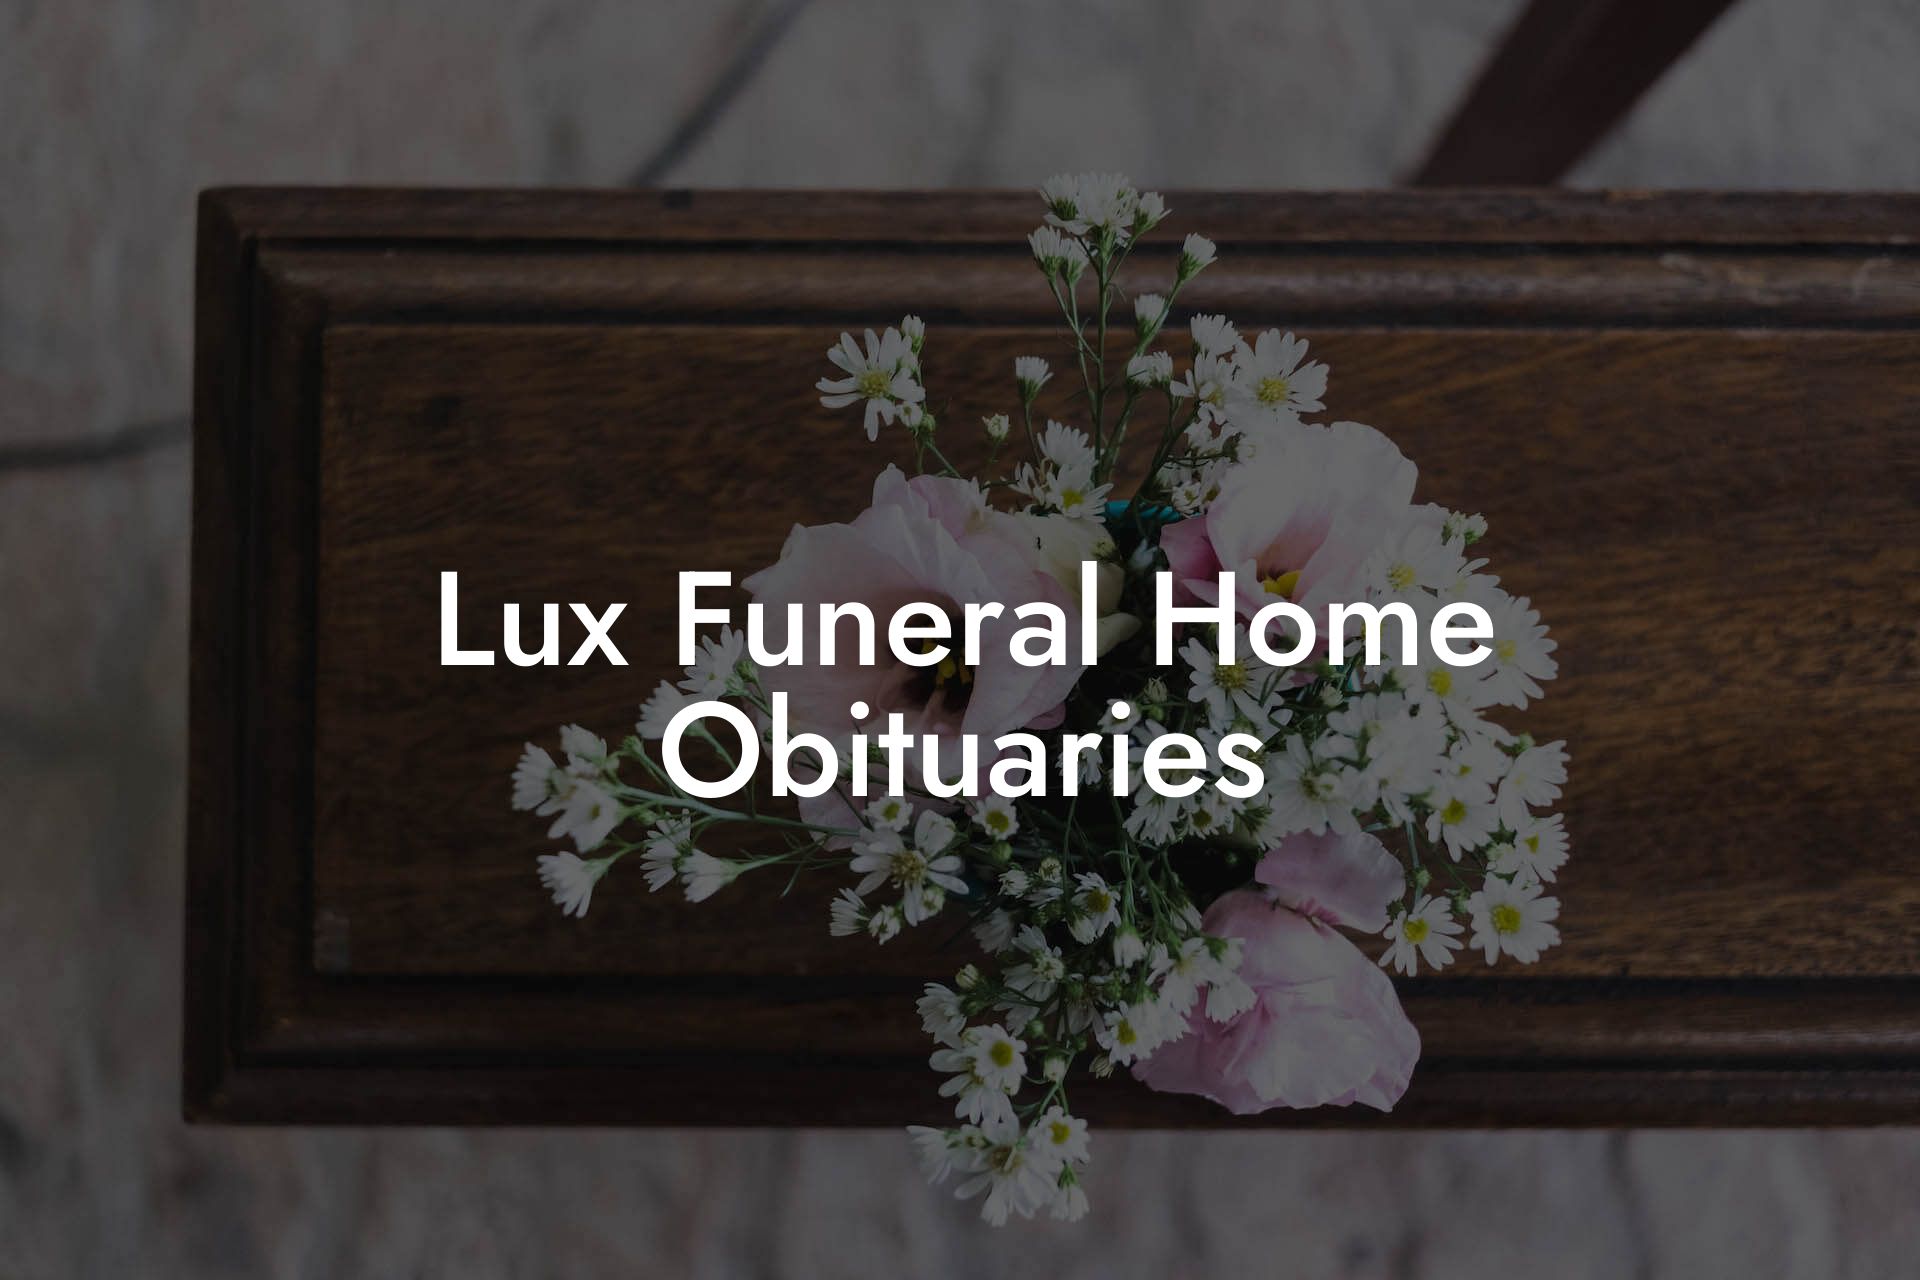 Lux Funeral Home Obituaries